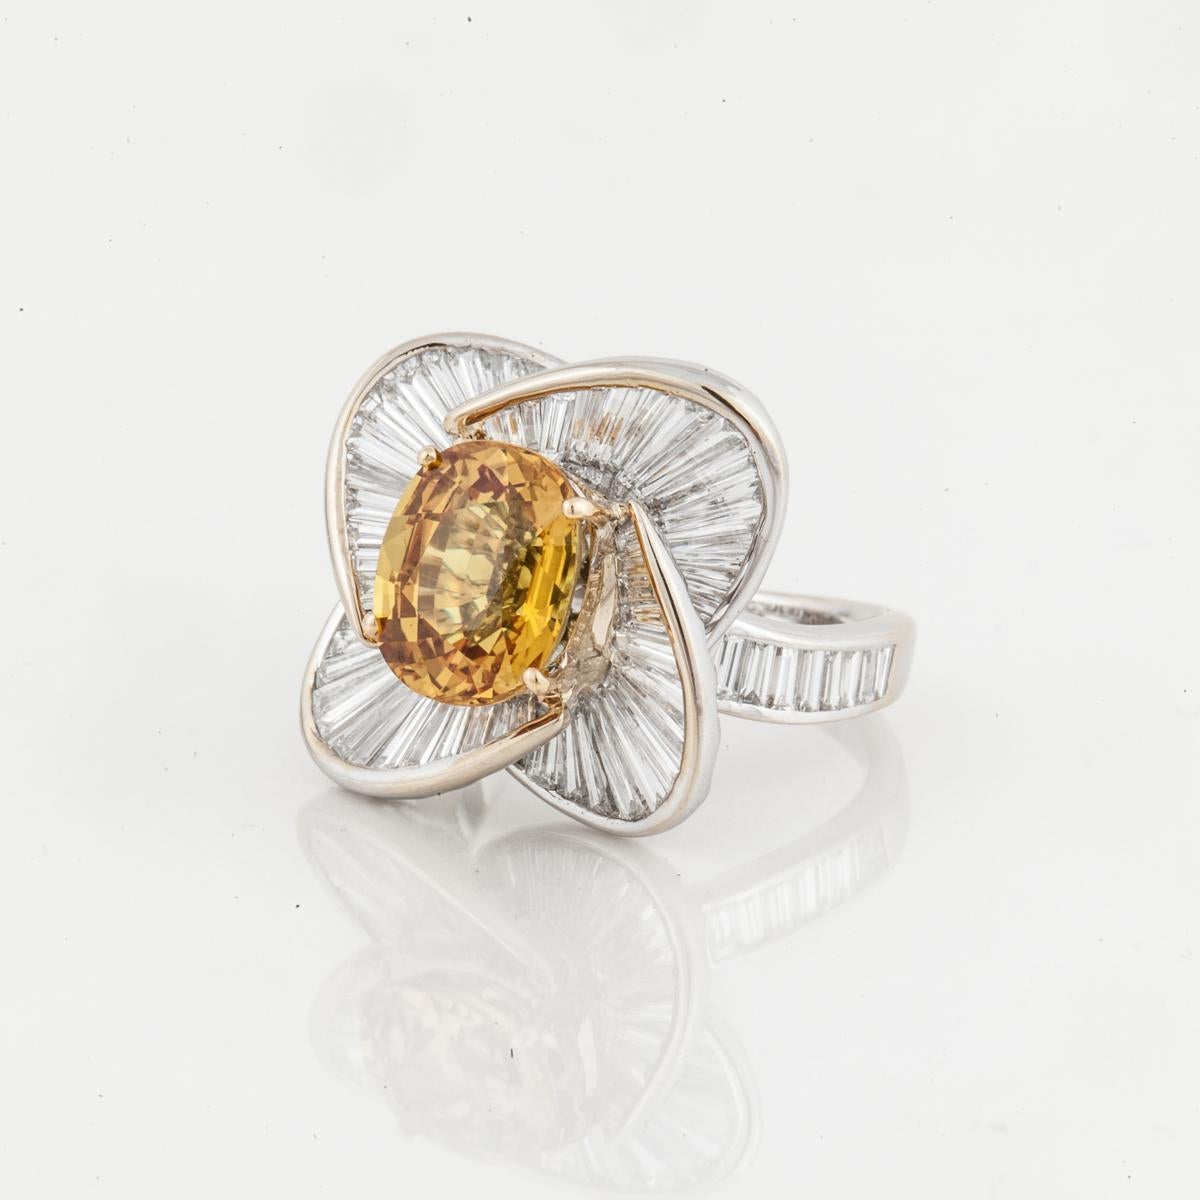 Salavetti 18K white gold ring featuring one oval golden sapphire that totals 4.88 carats.  Surrounding the sapphire and down the shank, are 80 baguette diamonds with a total carat weight of 5.25; G-H color and VVS-VS clarity.  Measures 13/16 inches